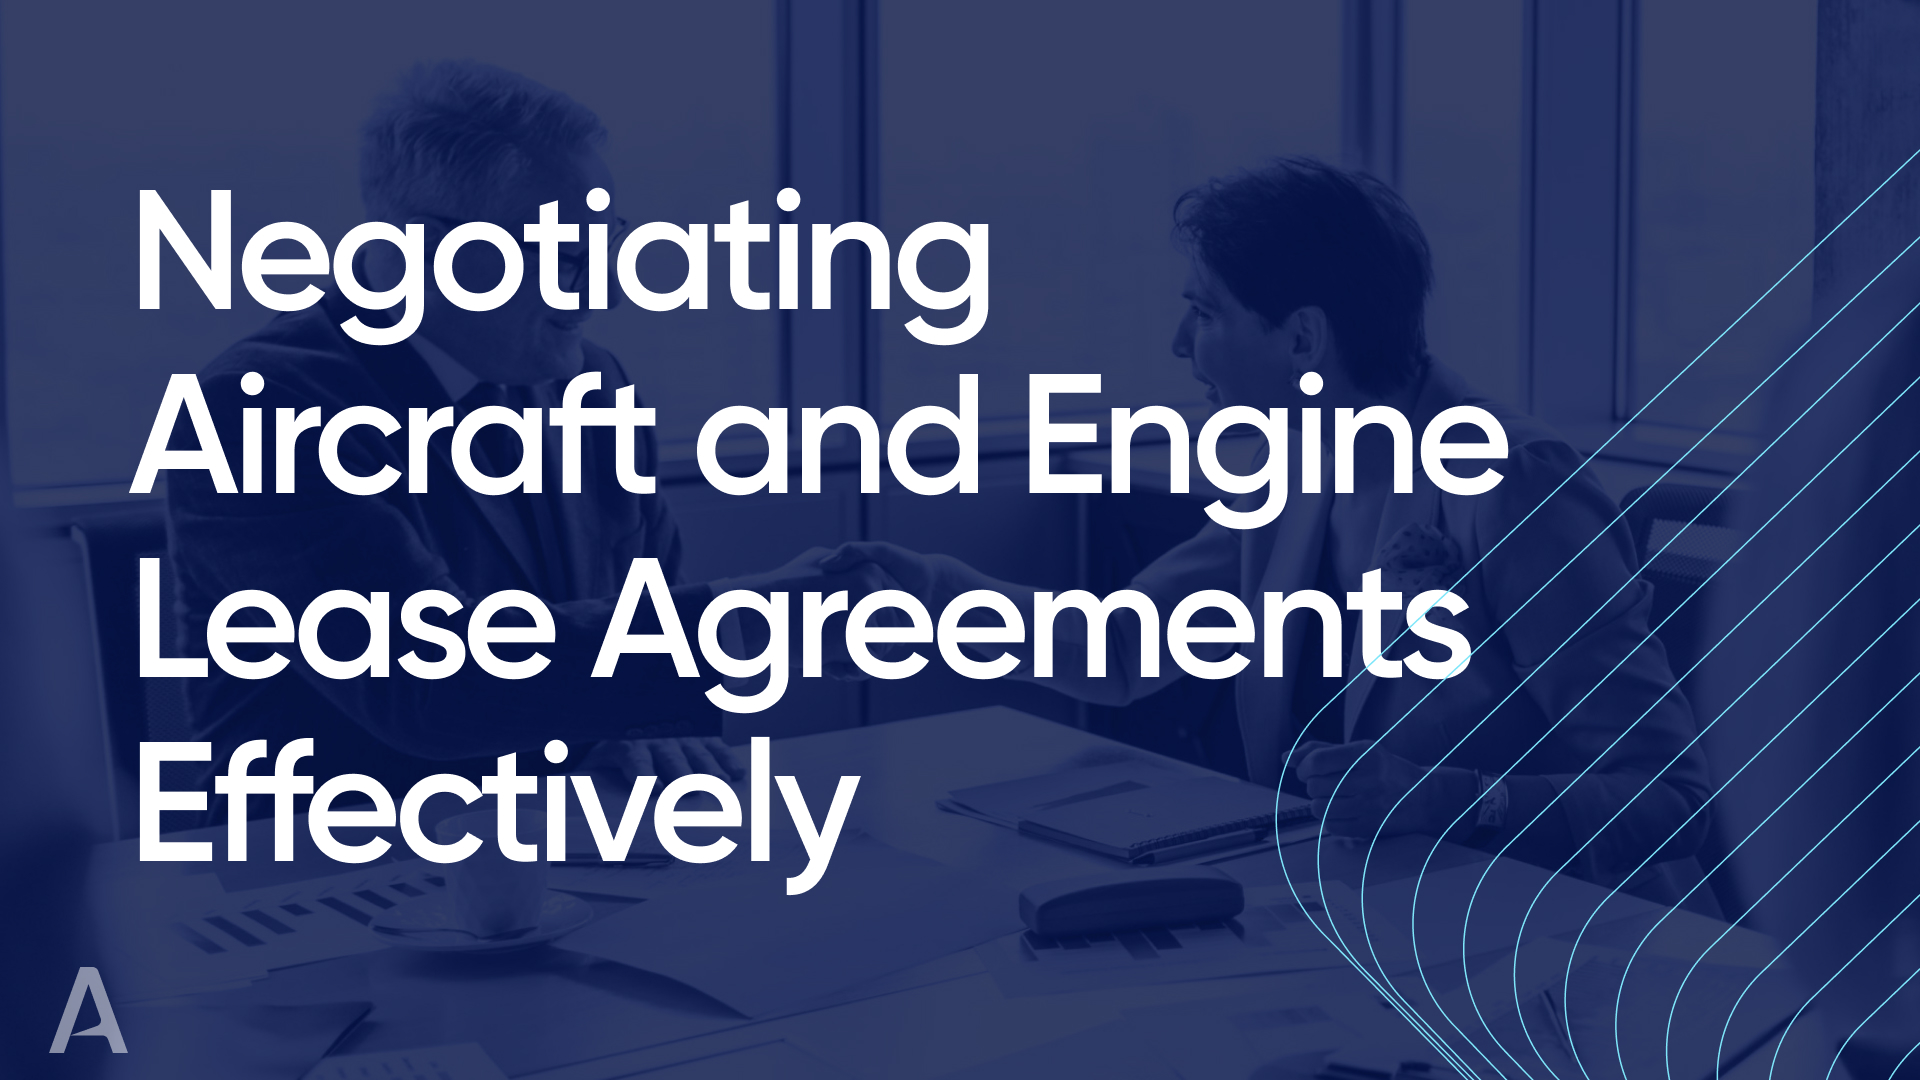 Negotiating Aircraft and Engine Lease Agreements Effectively